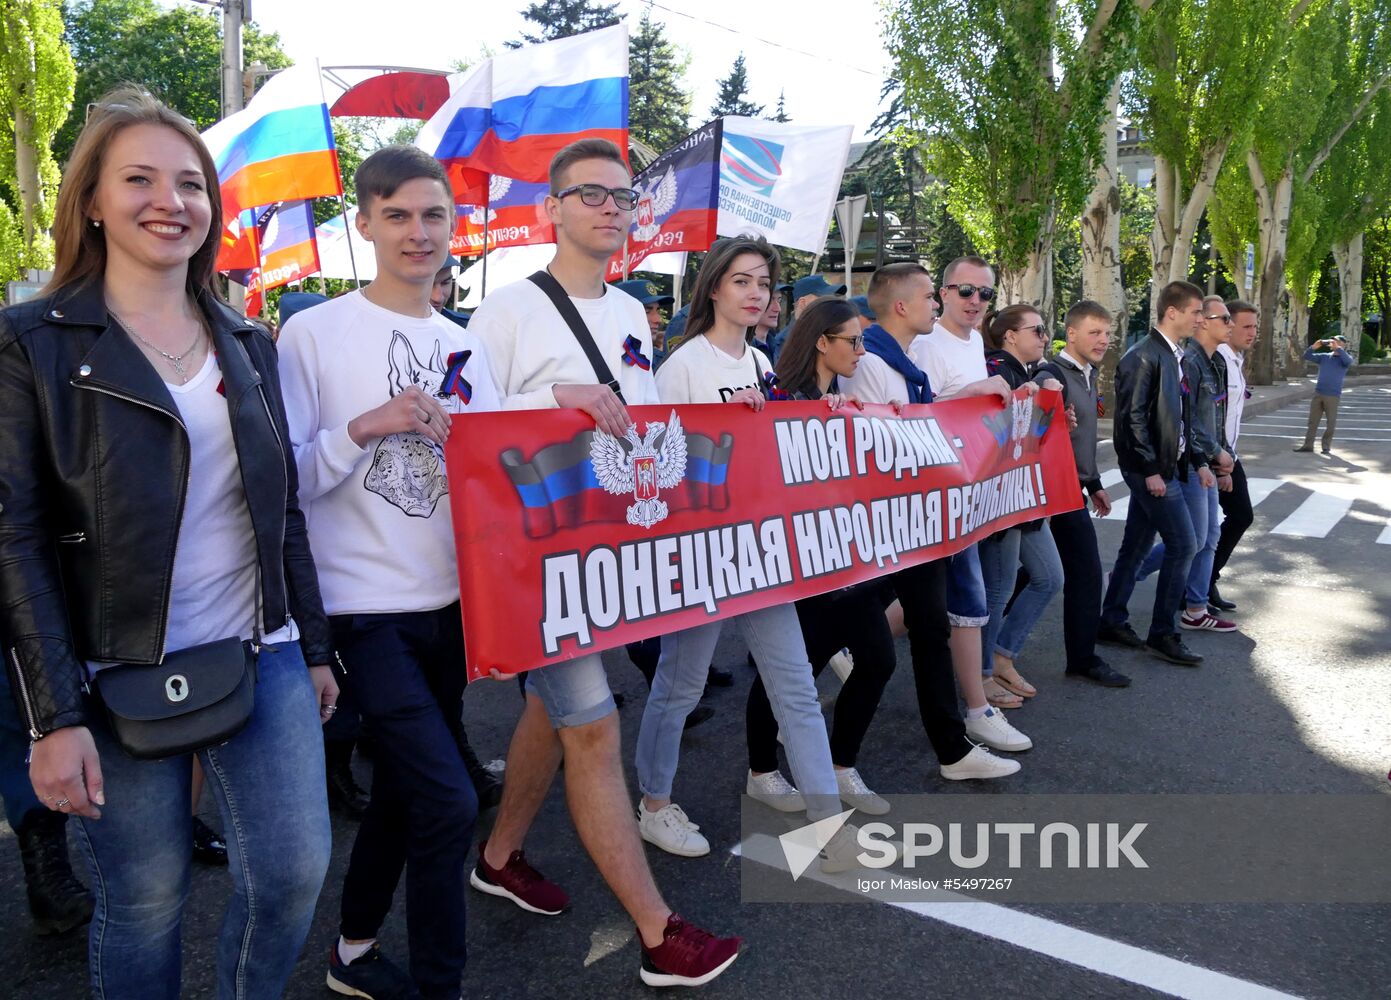 Celebration of the DPR's declaration of independence in Donetsk